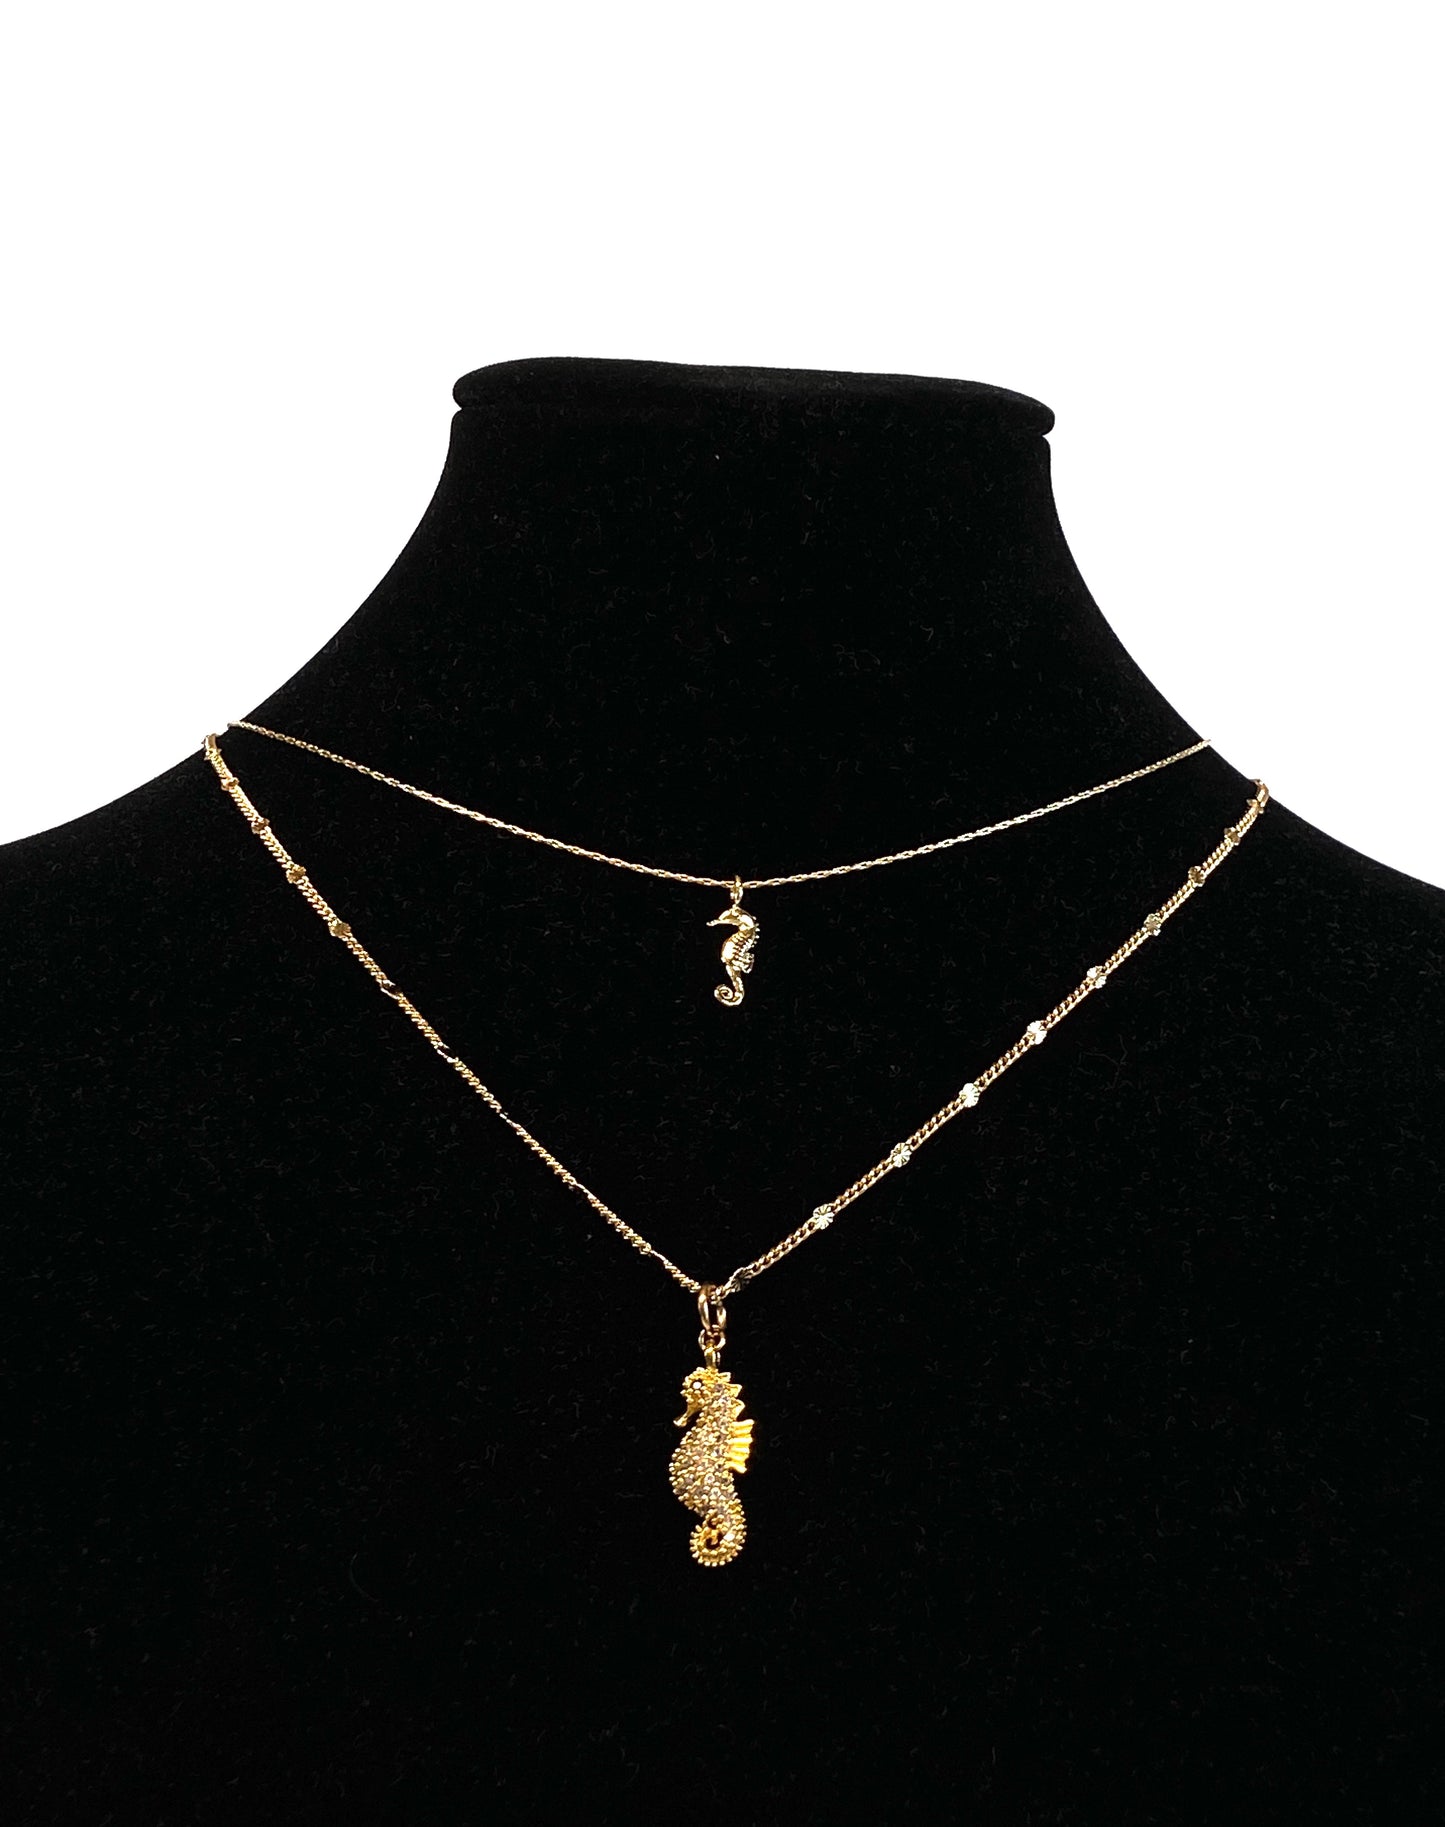 24 Kt Gold plated layered chain with CZ Seahorse pendant